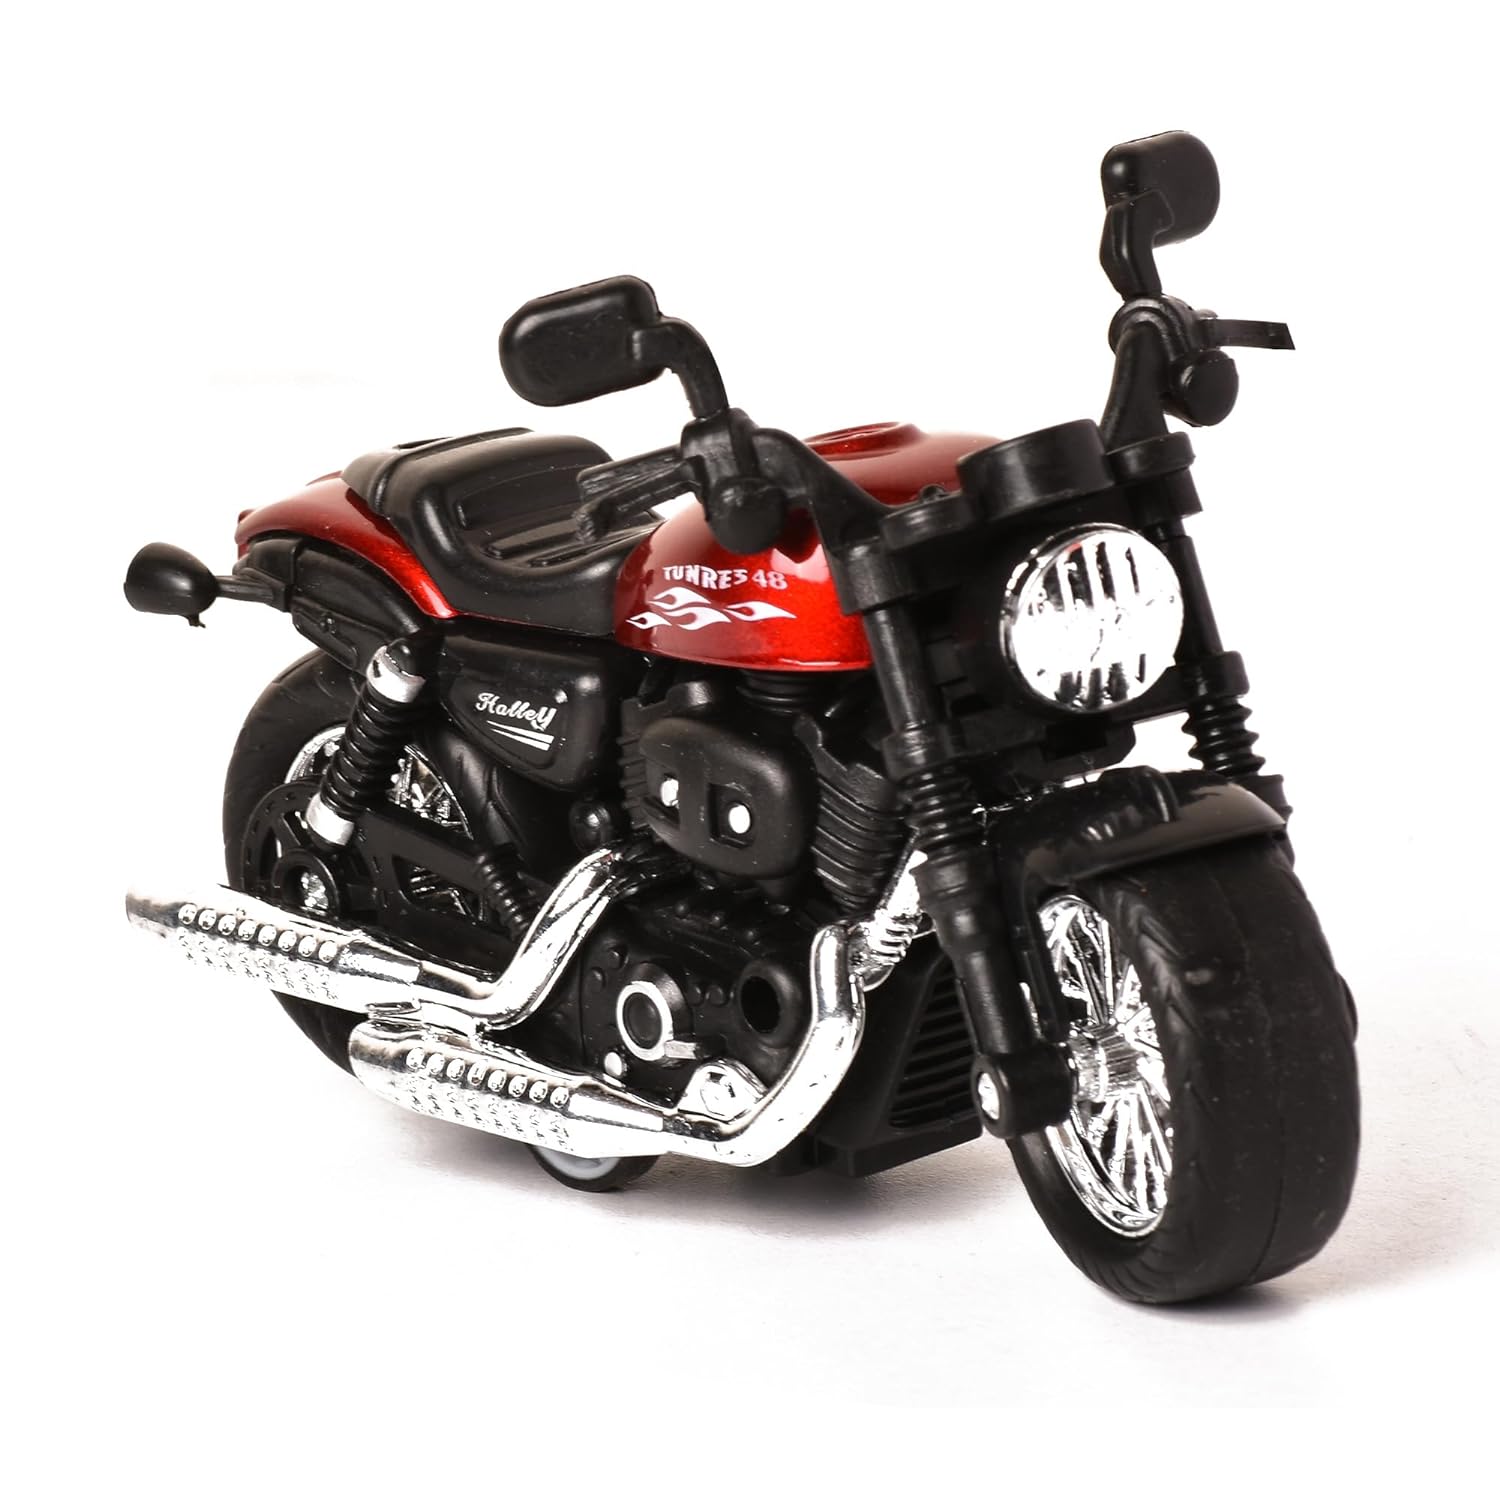 Braintastic Model Diecast Metal Bike Toy Vehicle Pull Back Friction Car with Openable Doors Light & Music Toys for Kids Age 3+ Years (Royal Enfield Red)